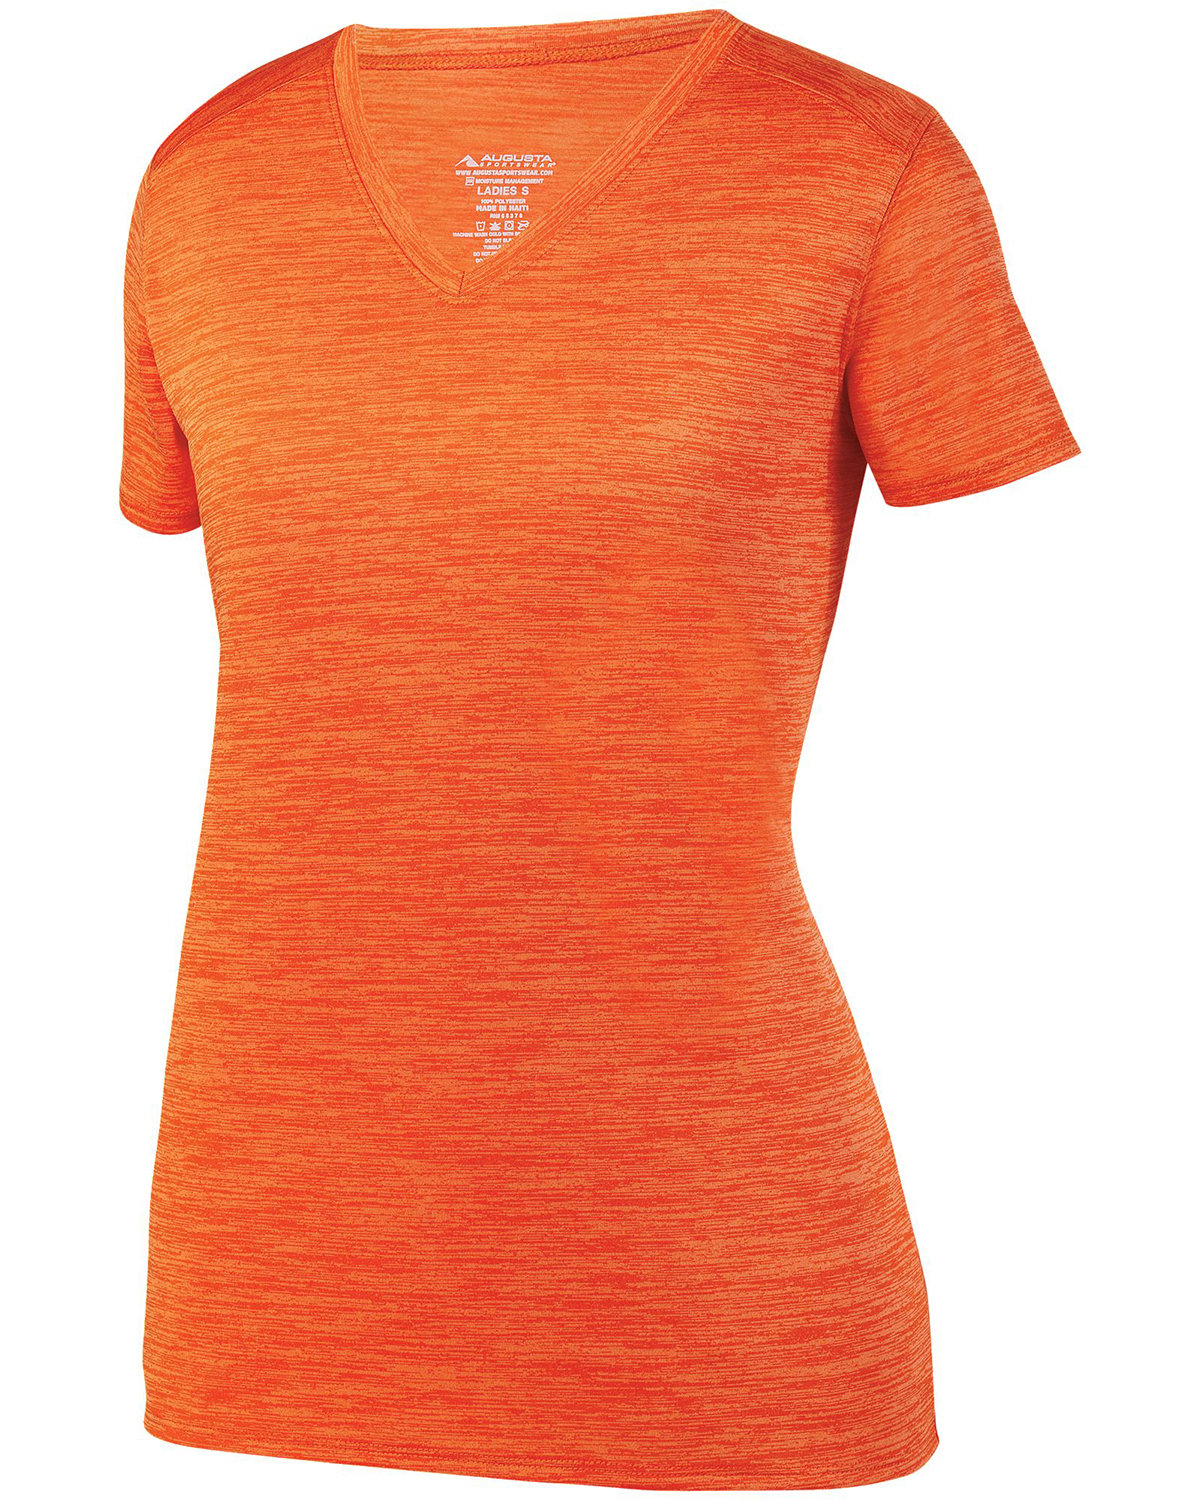 Front view of Ladies’ Shadow Tonal Heather Short-Sleeve Training T-Shirt